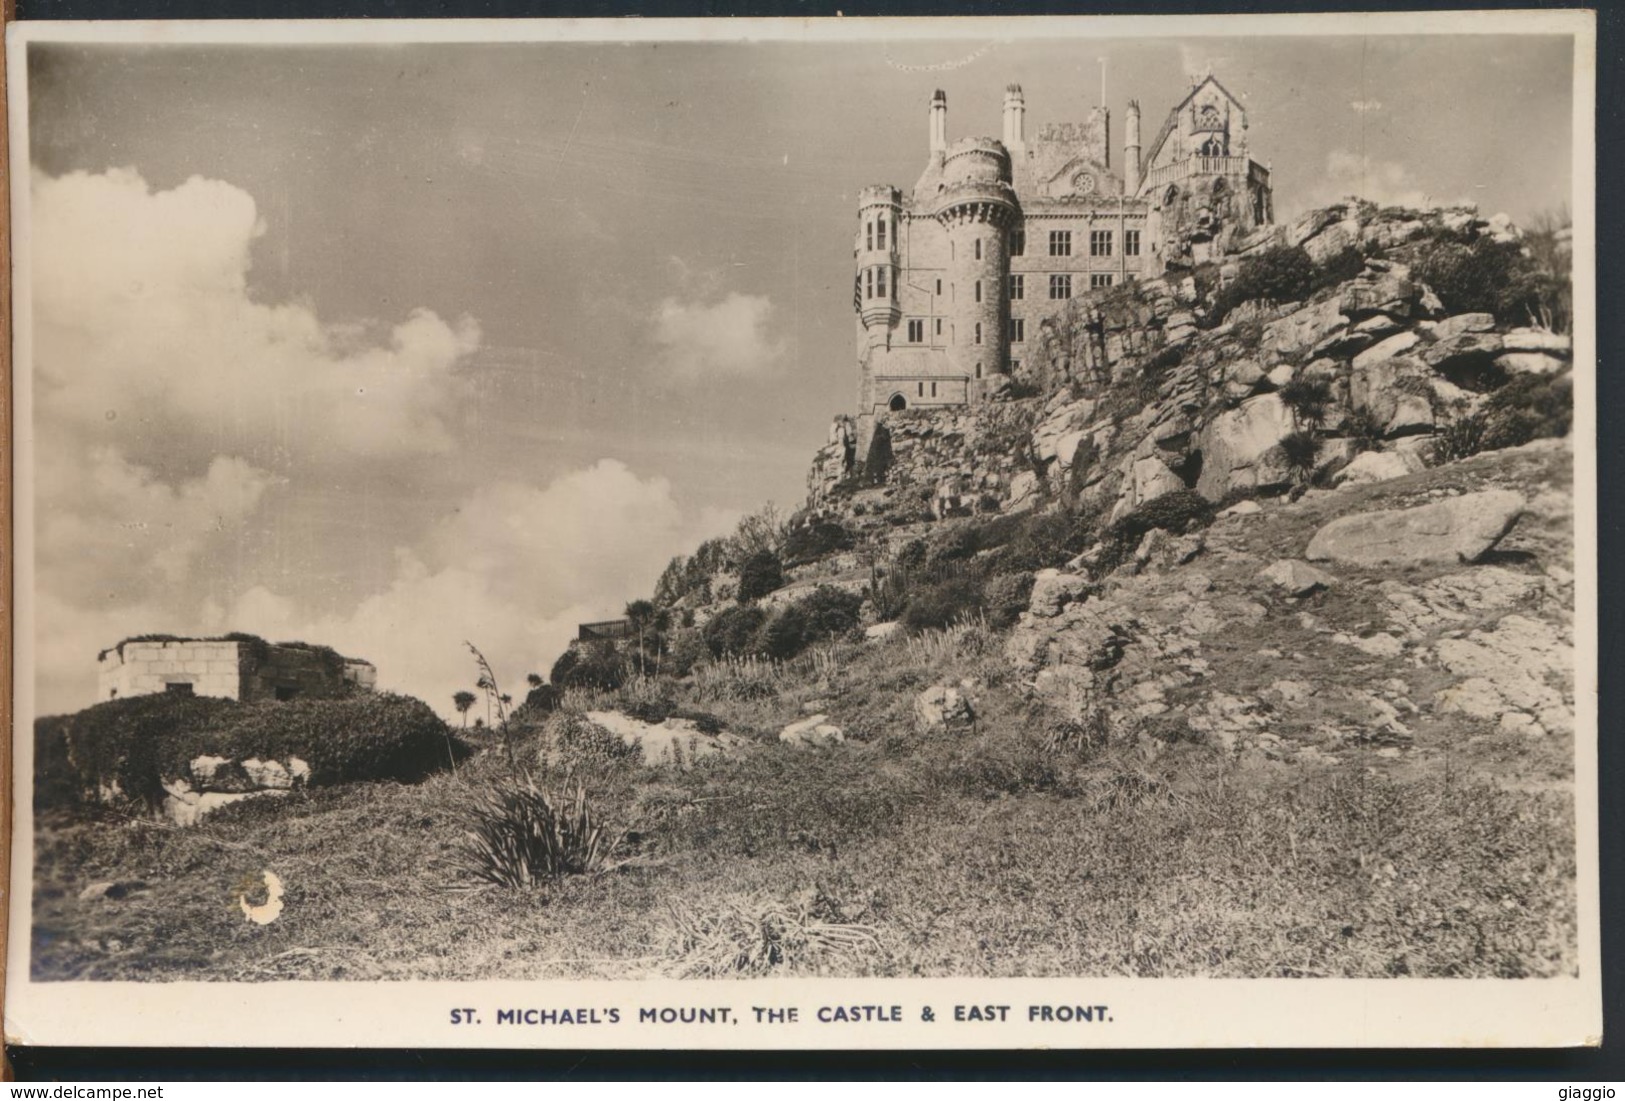 °°° 11797 - UK - ST. MICHAEL'S MOUNT , THE CASTLE & EAST FRONT - 1950 With Stamps °°° - St Michael's Mount